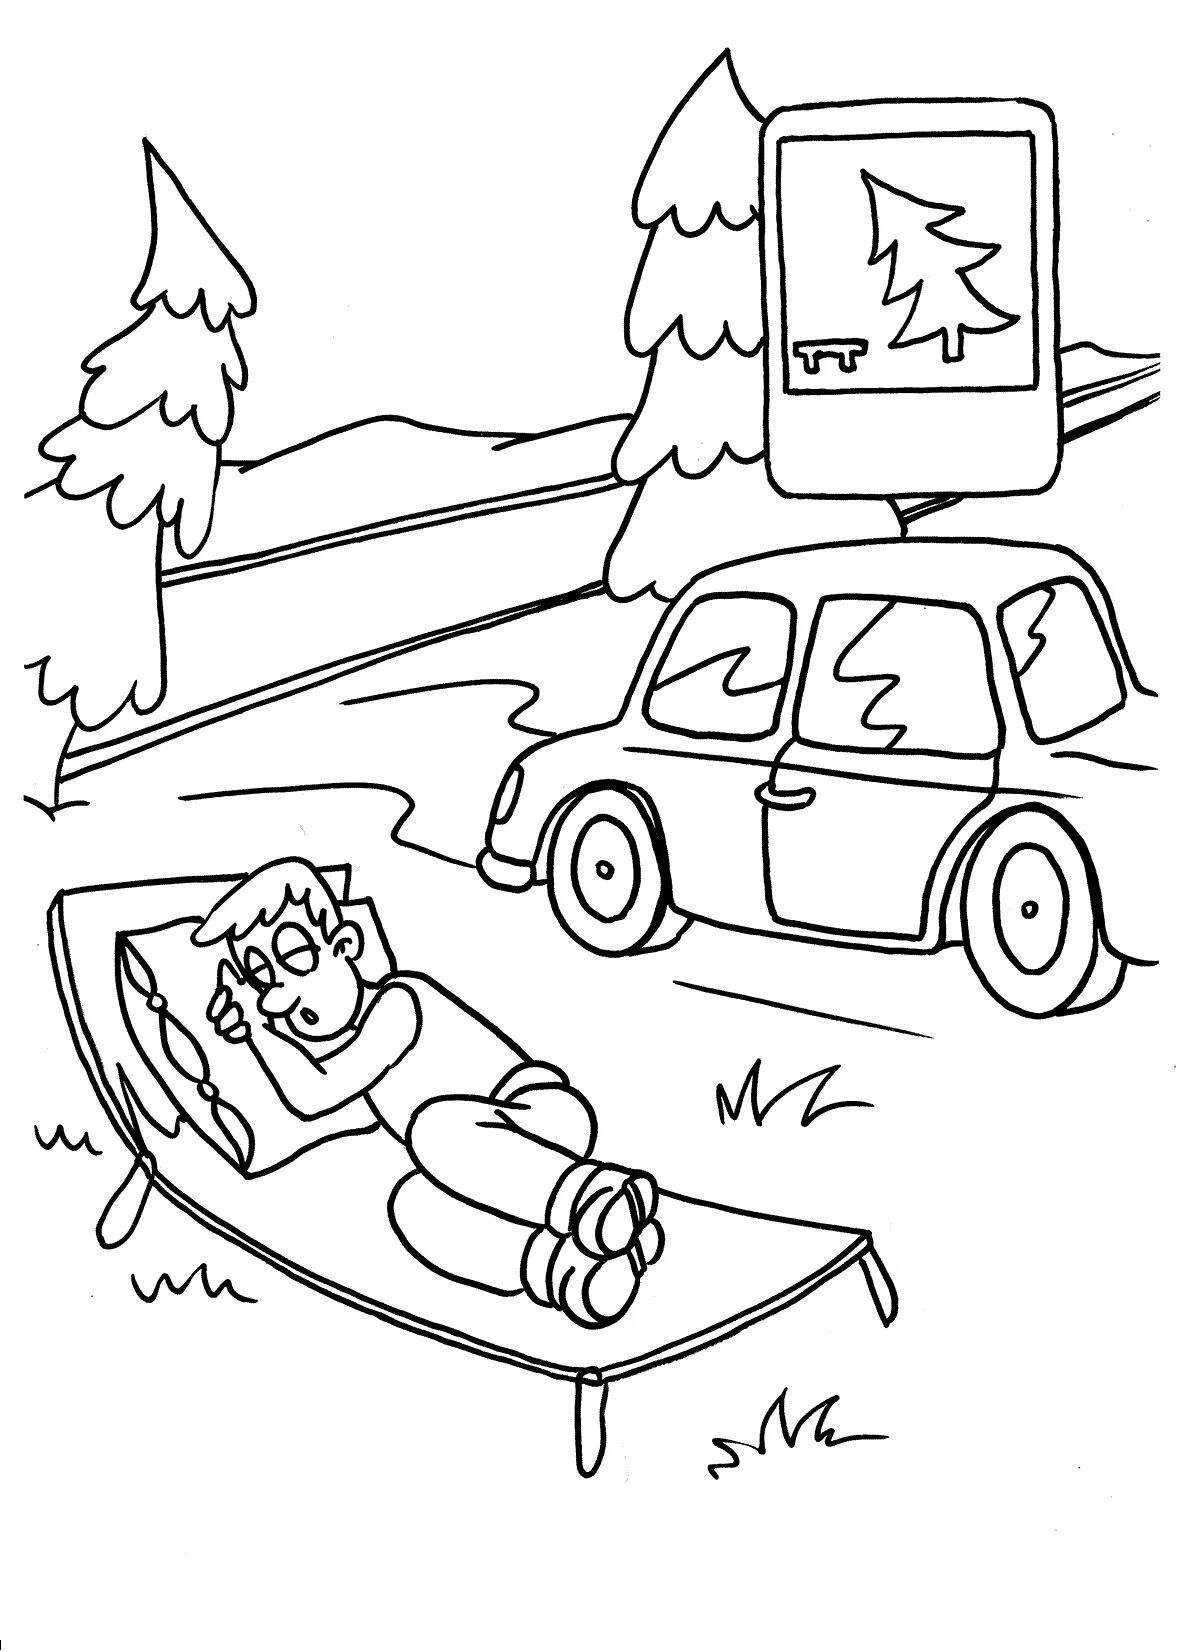 Coloring pictures of my dad and me for safer roads